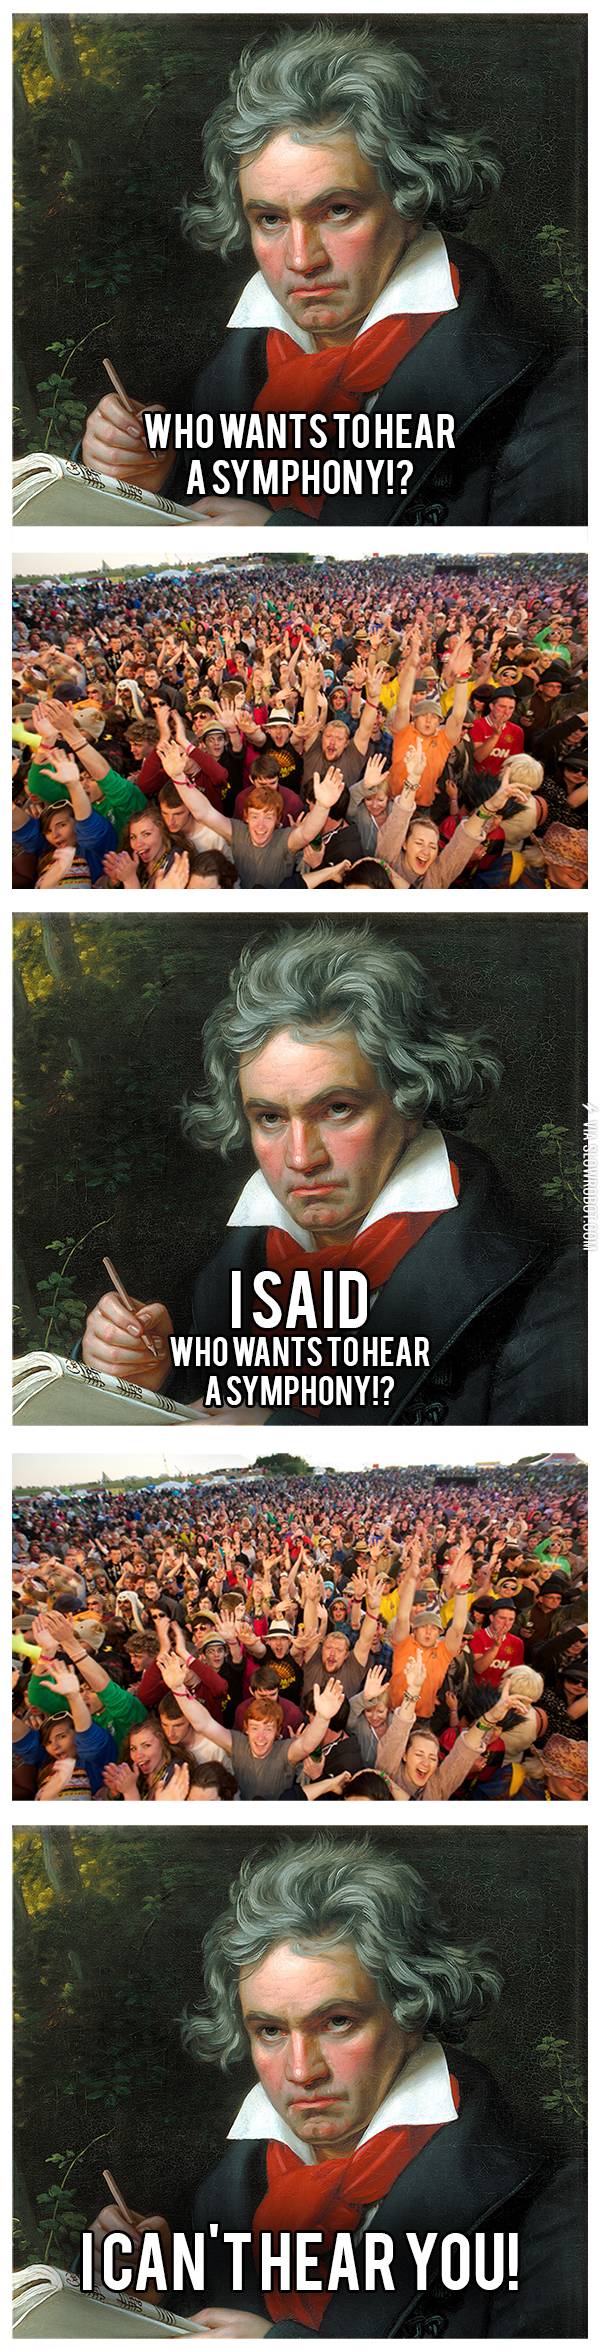 Beethoven%26%238217%3Bs+Tenth+Symphony